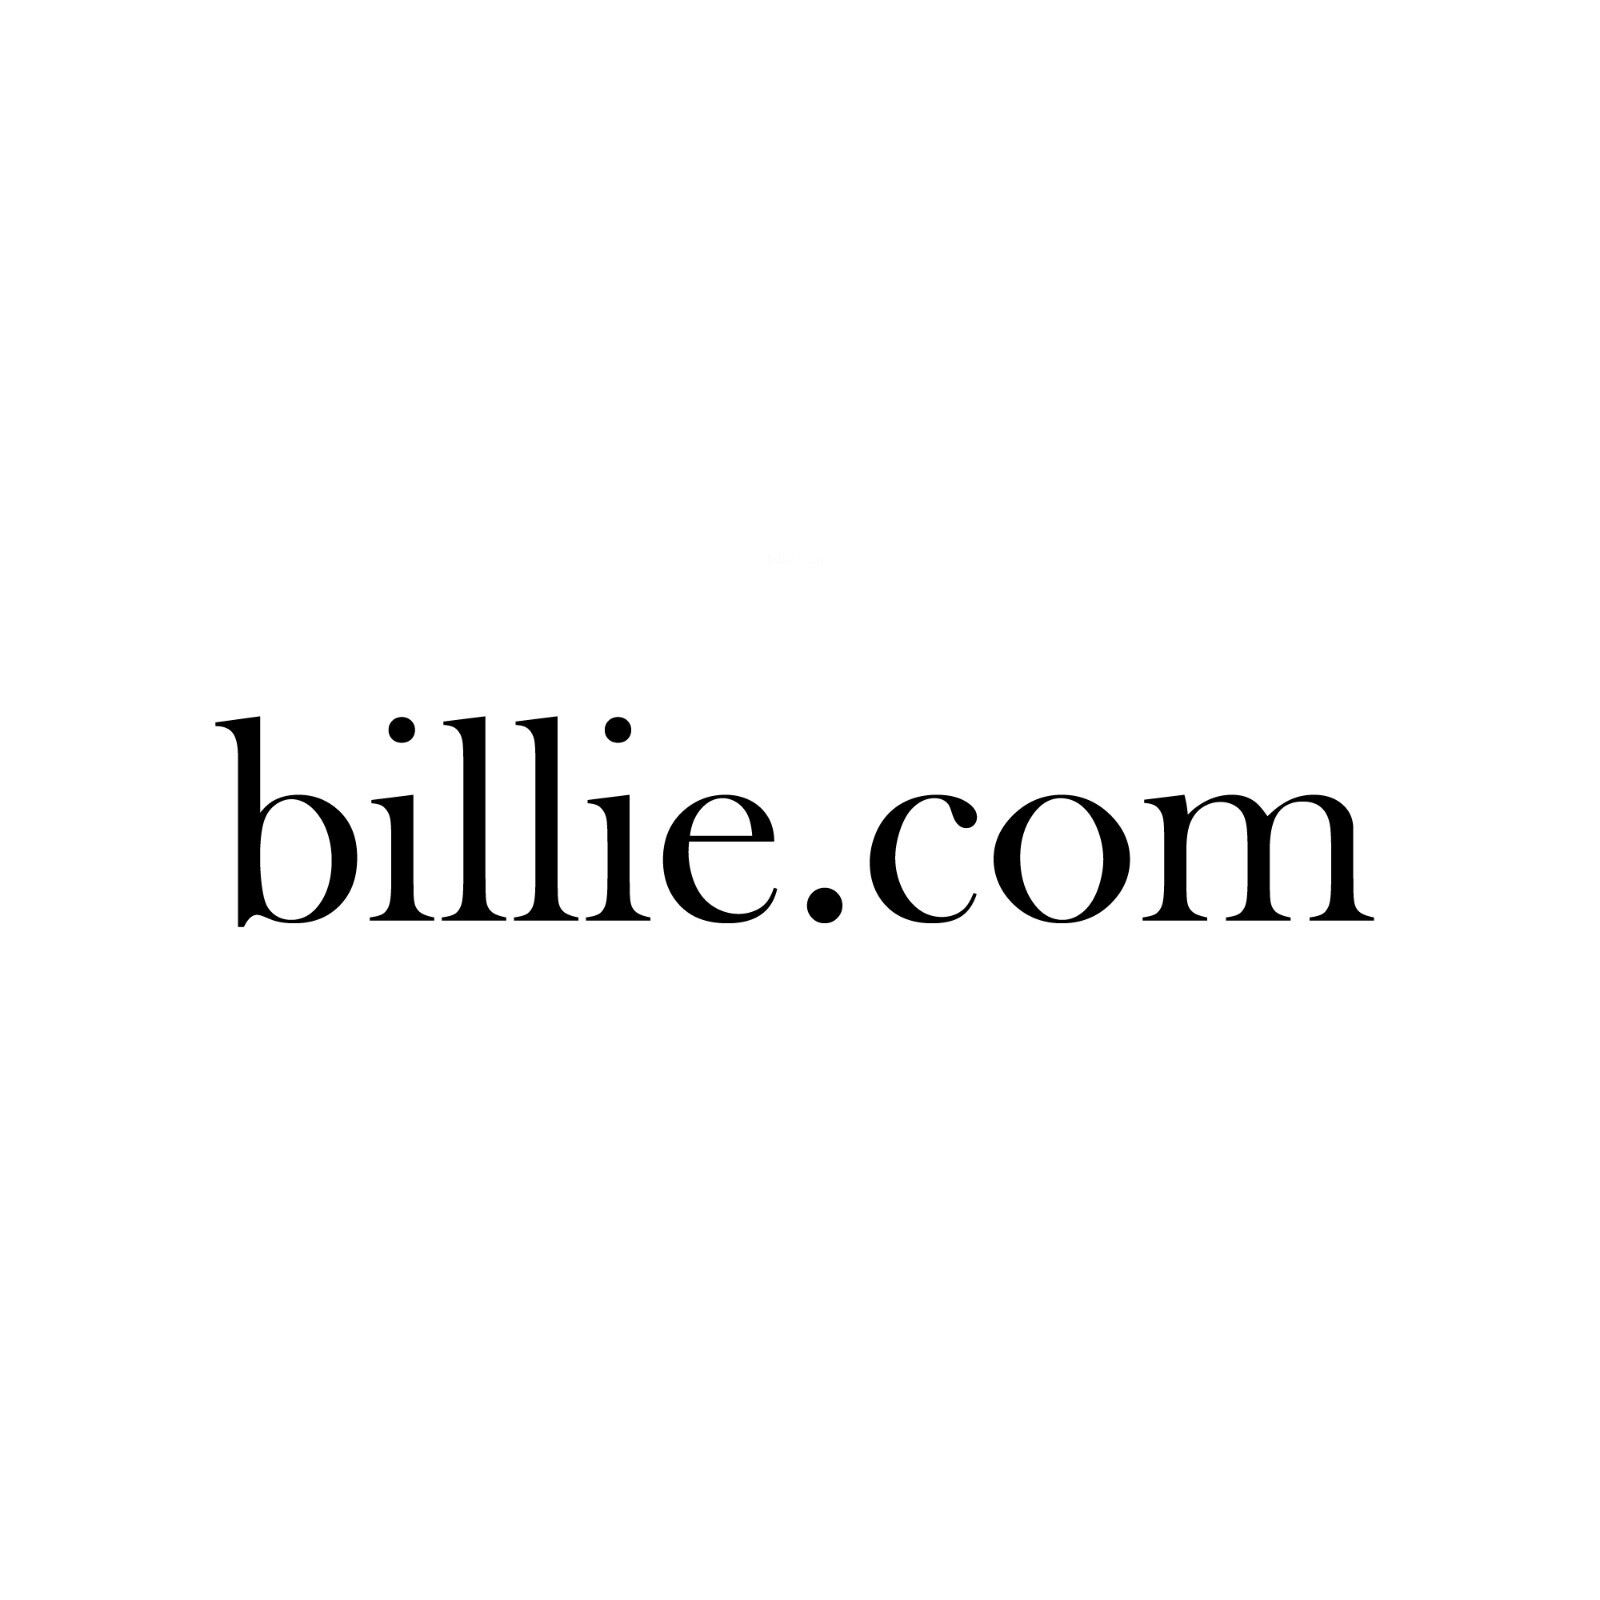 Billie.com Domain Name Real Estate Online-thousands-of Non Stop Type In Traffic!